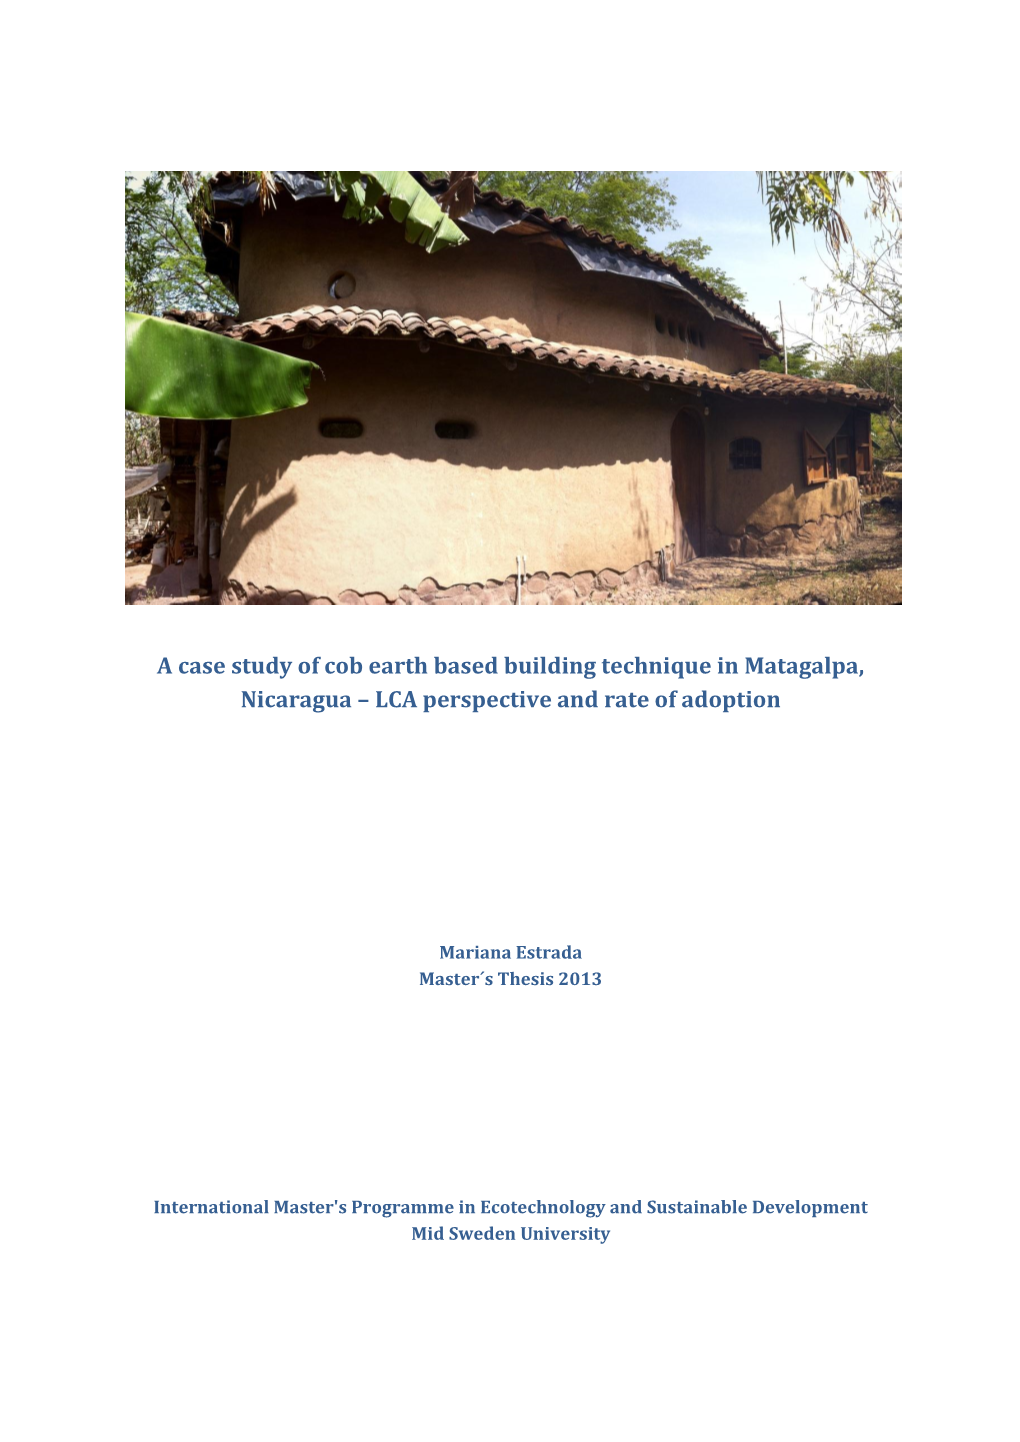 A Case Study of Cob Earth Based Building Technique in Matagalpa, Nicaragua – LCA Perspective and Rate of Adoption